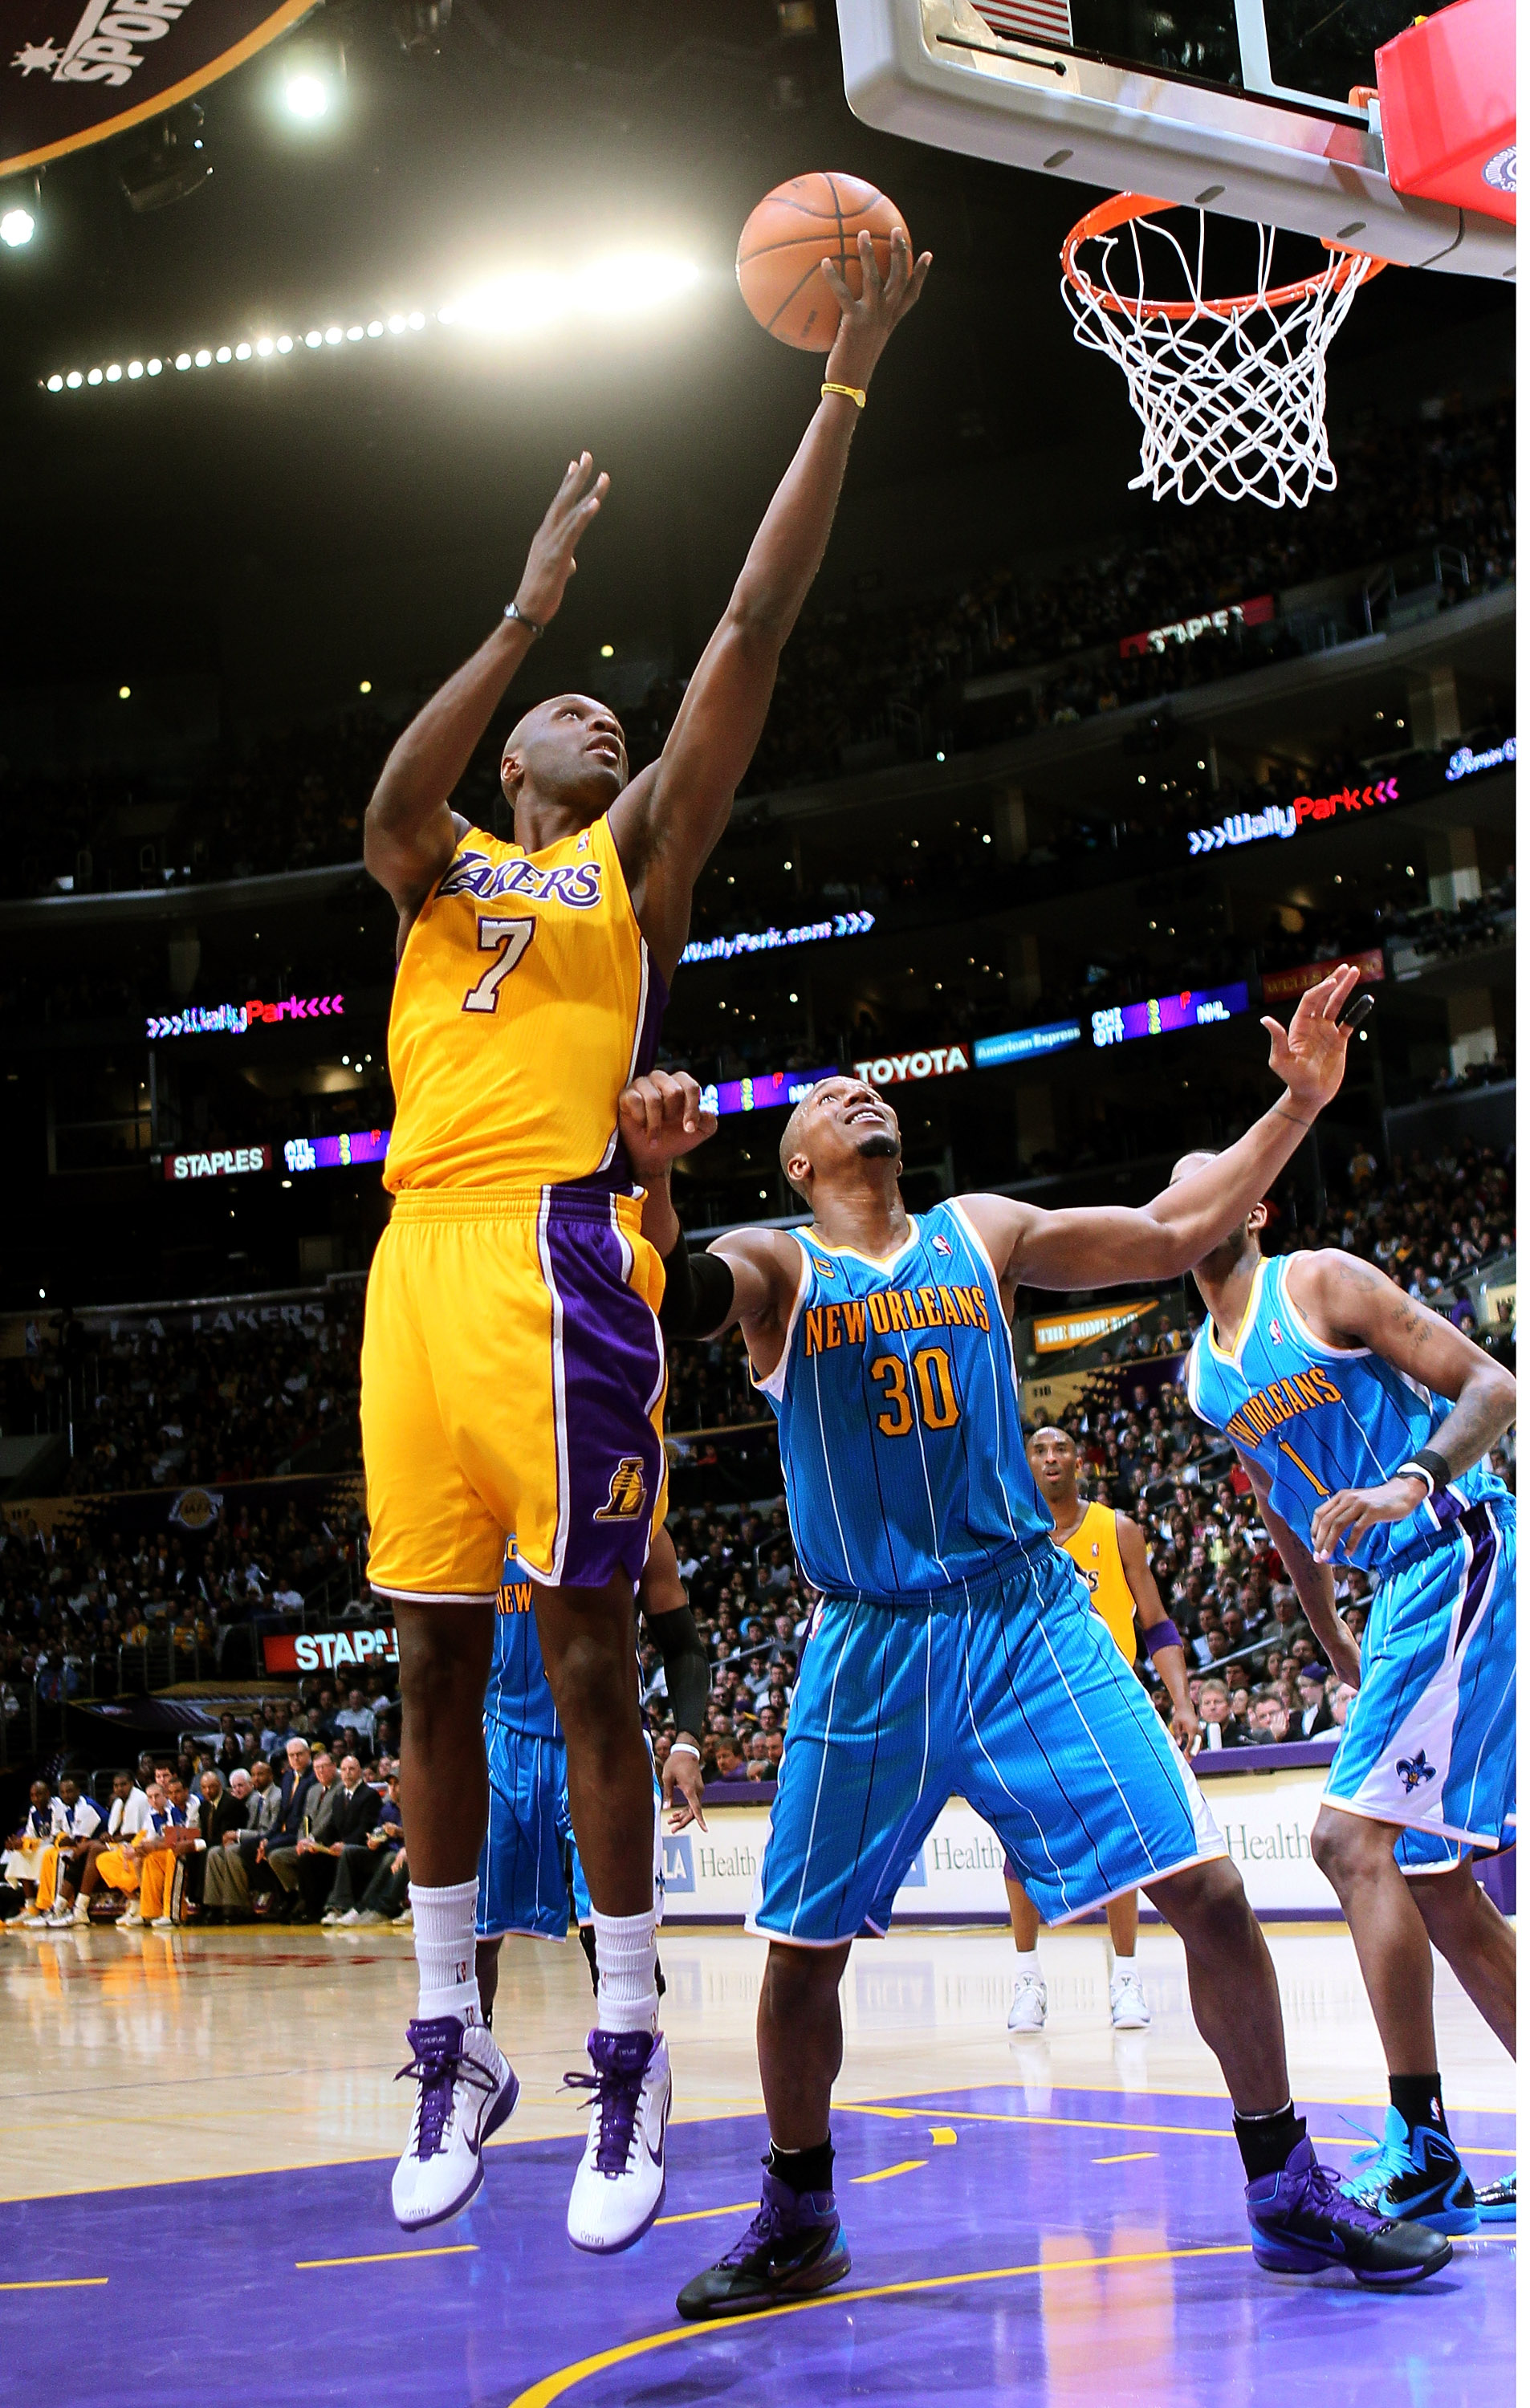 LOS ANGELES, CA - JANUARY 7:  Lamar Odom #7 of the Los Angeles Lakers shoots over David West #30 of the New Orleans Hornets at Staples Center on January 7, 2011 in Los Angeles, California.  The Lakers won 101-97.  NOTE TO USER: User expressly acknowledges